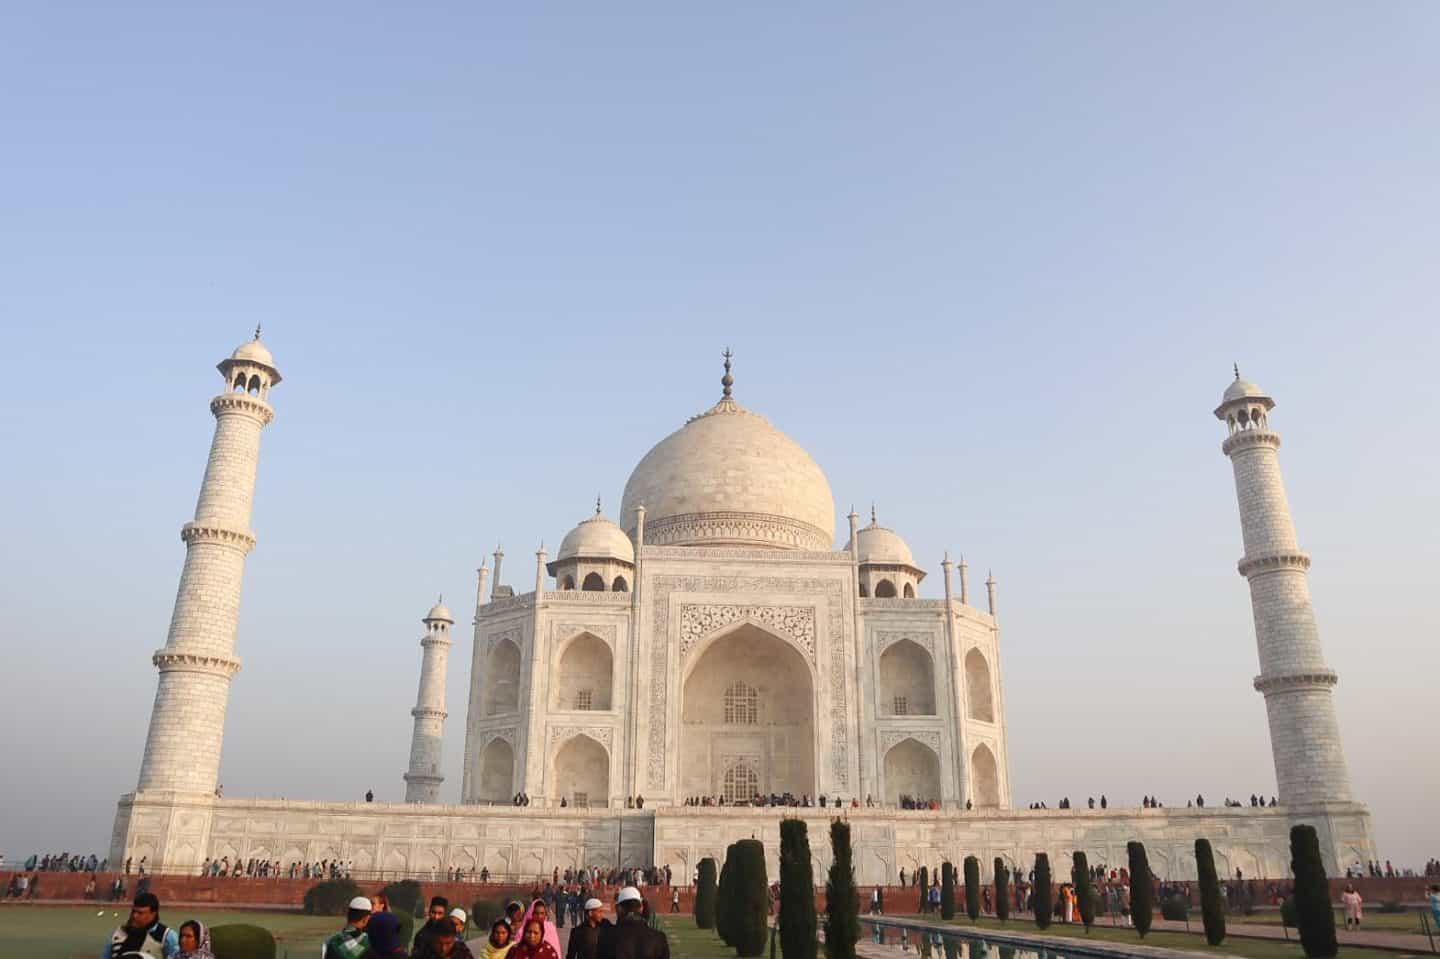 Taj Mahal India and blue sky | planning a trip to India